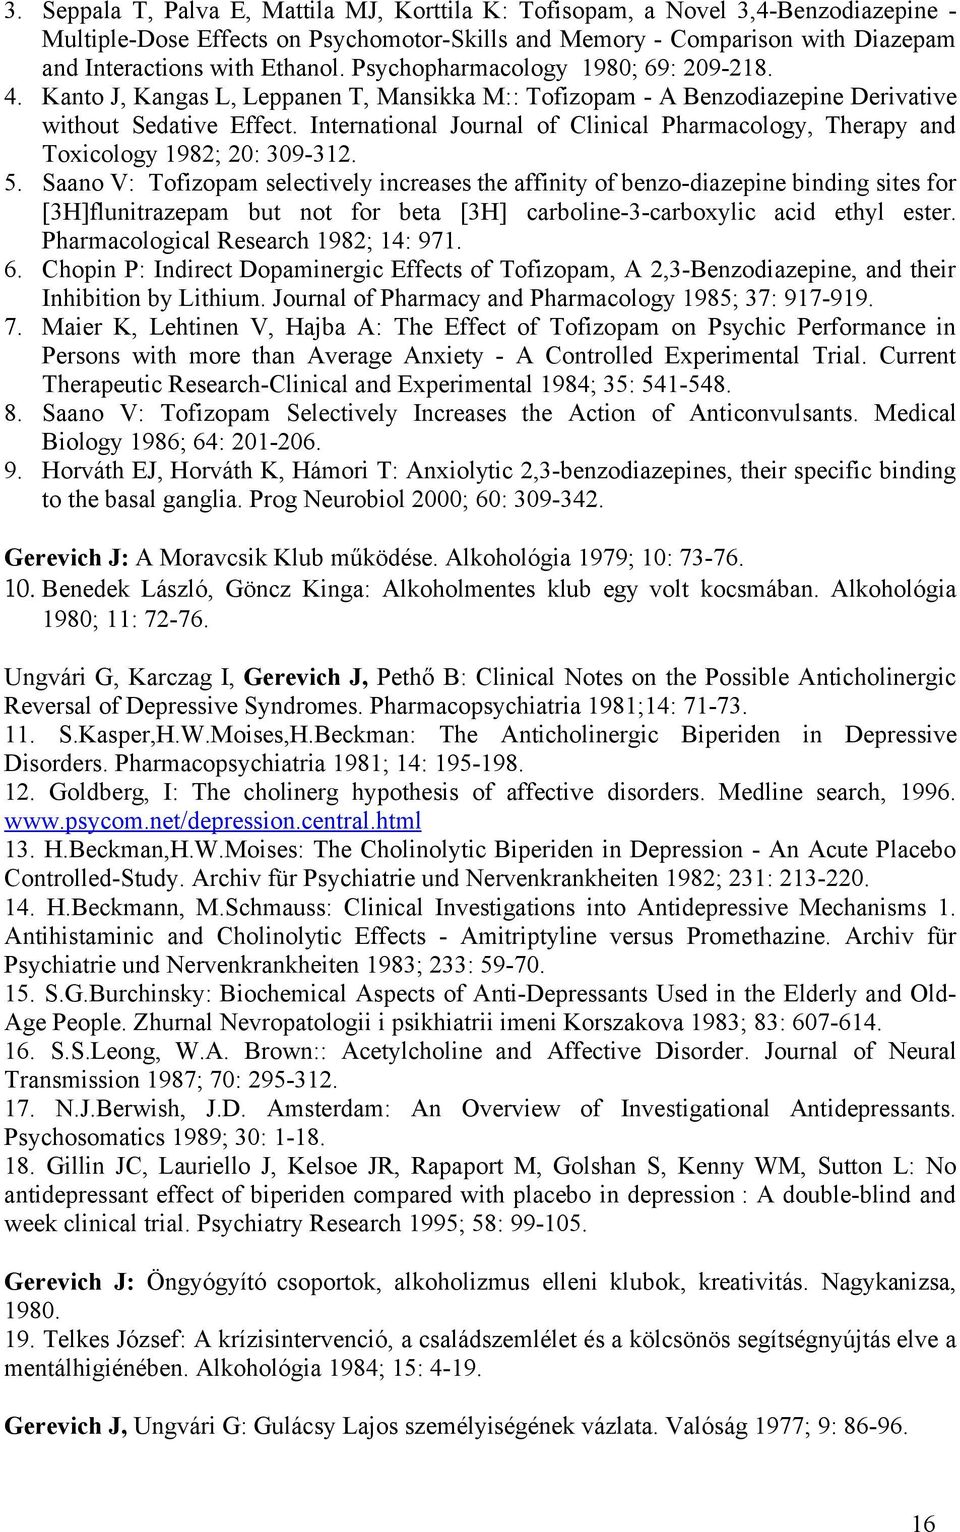 International Journal of Clinical Pharmacology, Therapy and Toxicology 1982; 20: 309-312. 5.